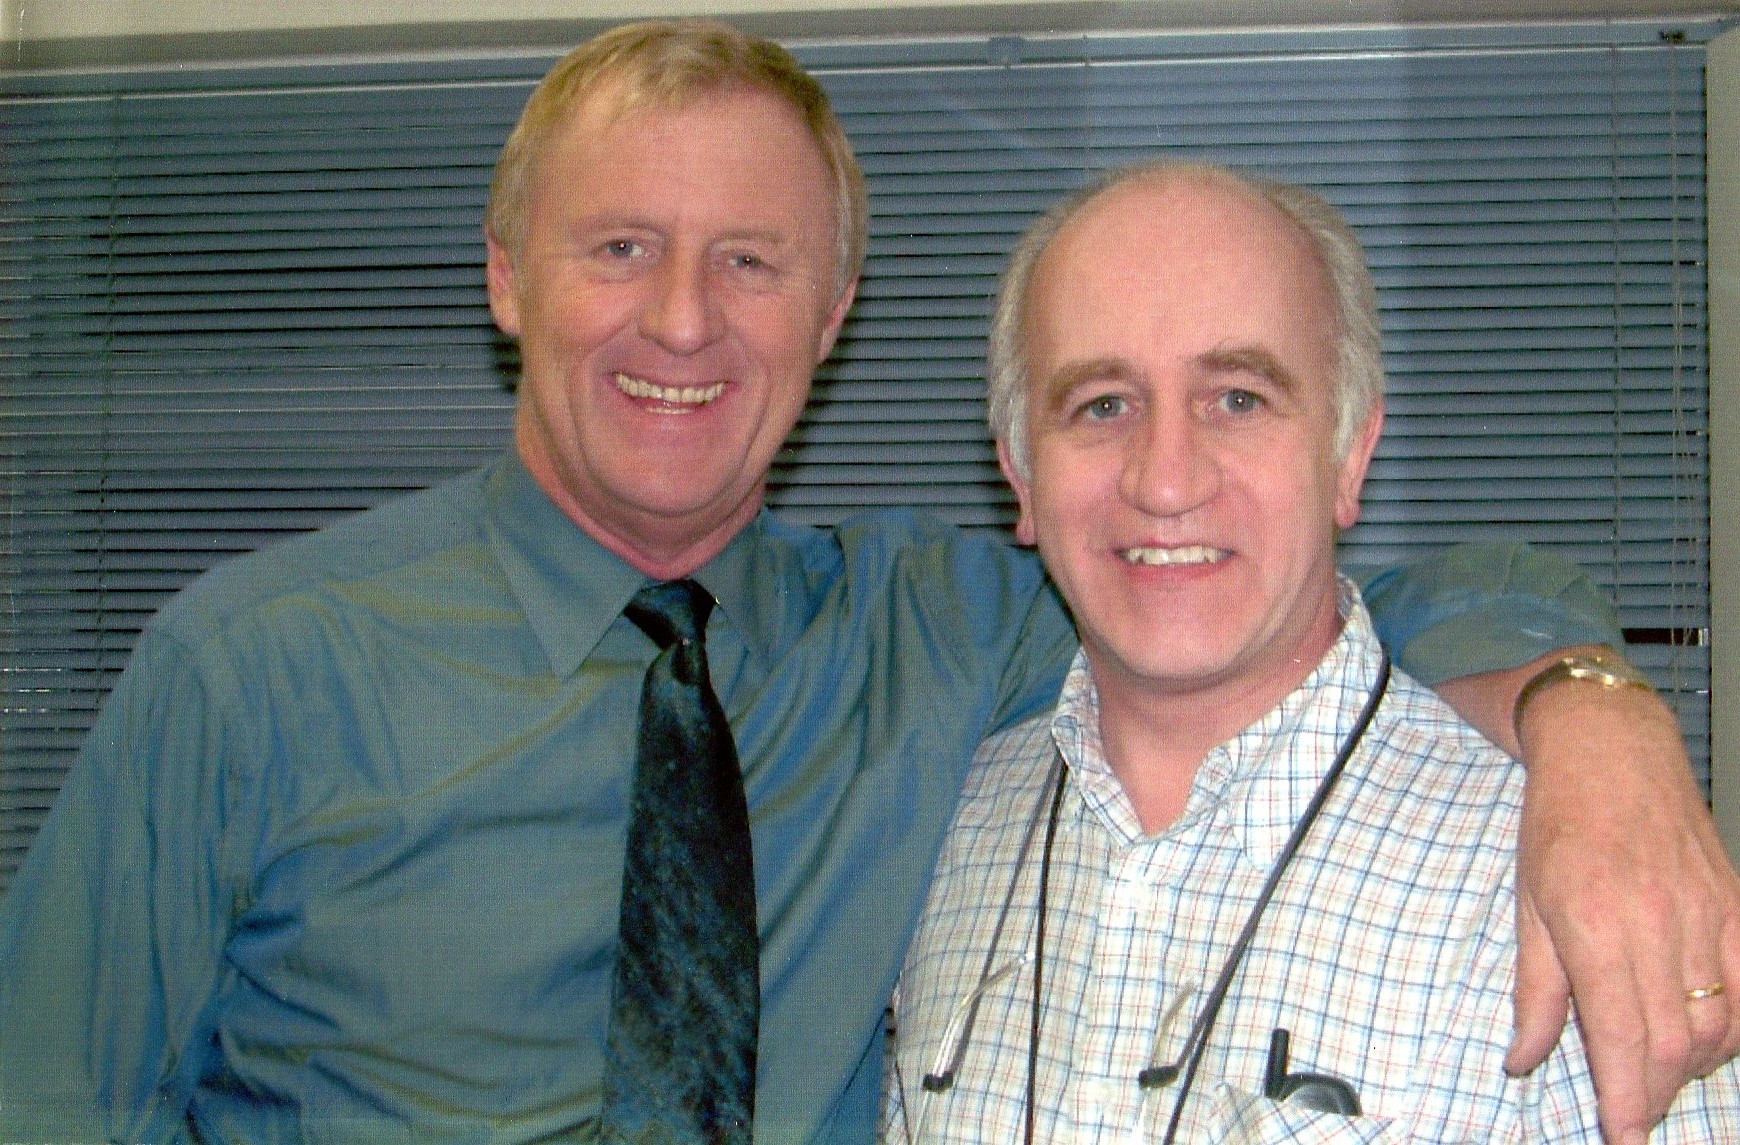 Me with TV & Radio personality Chris Tarrant. Directing him for TV.